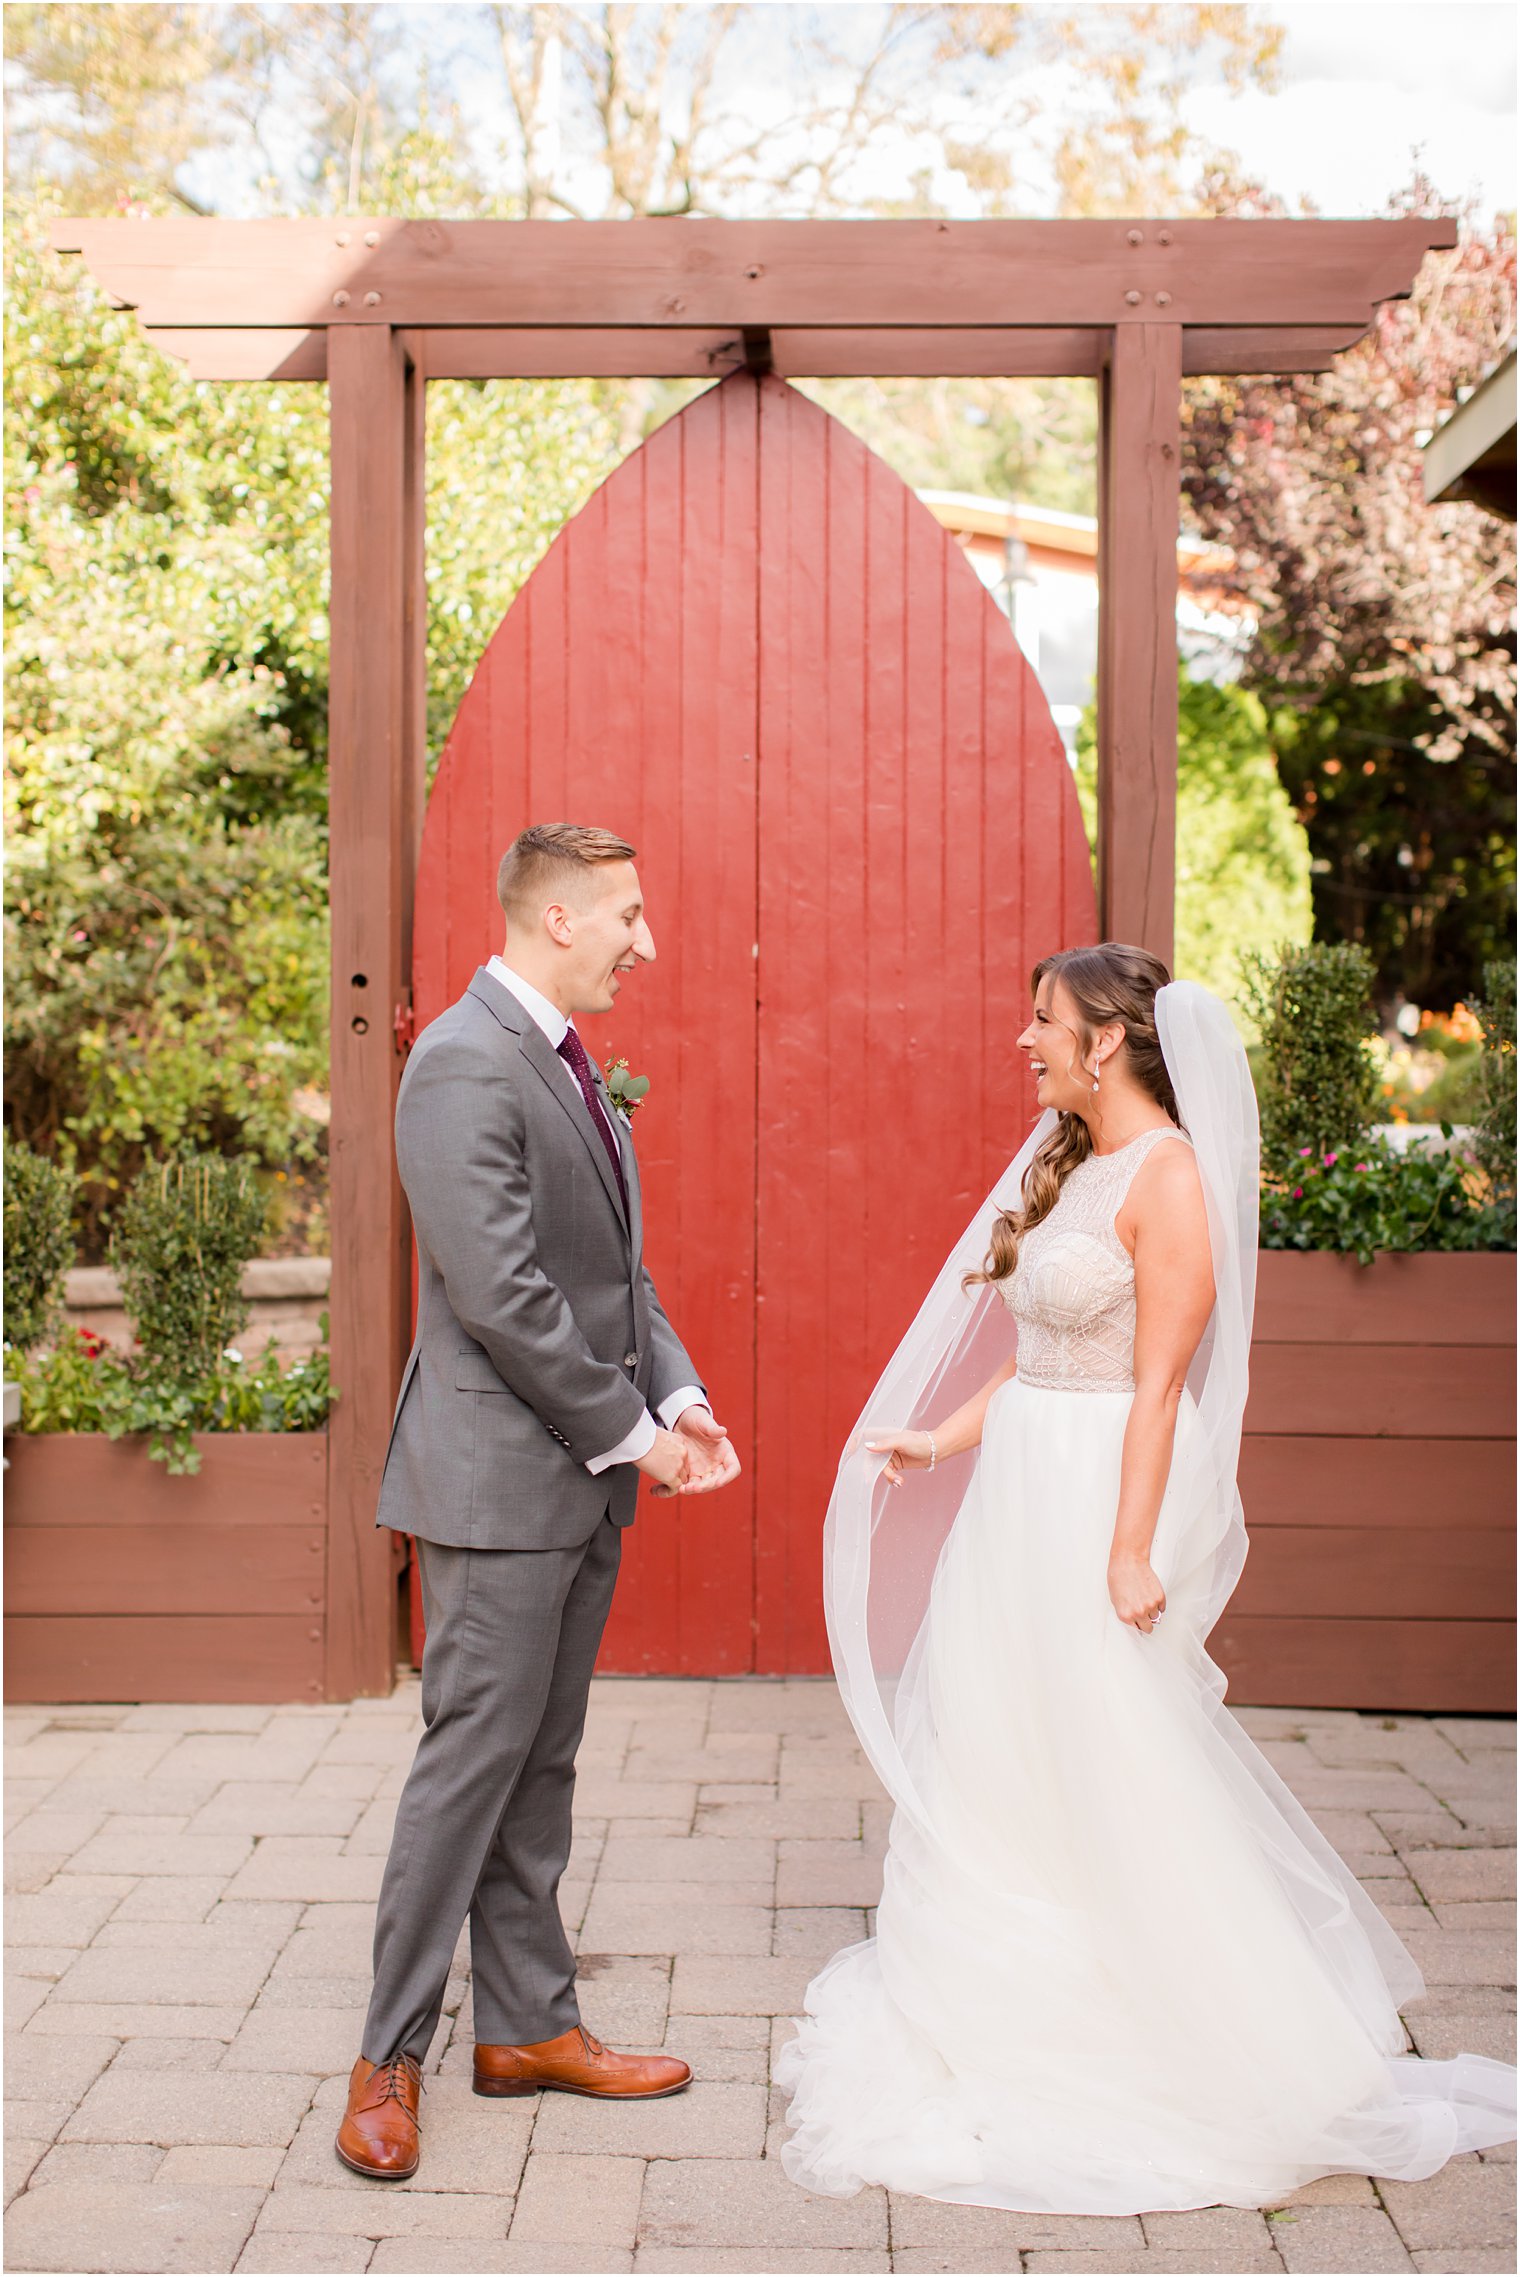 Stone House at Stirling Ridge wedding day first look photographed by Idalia Photography